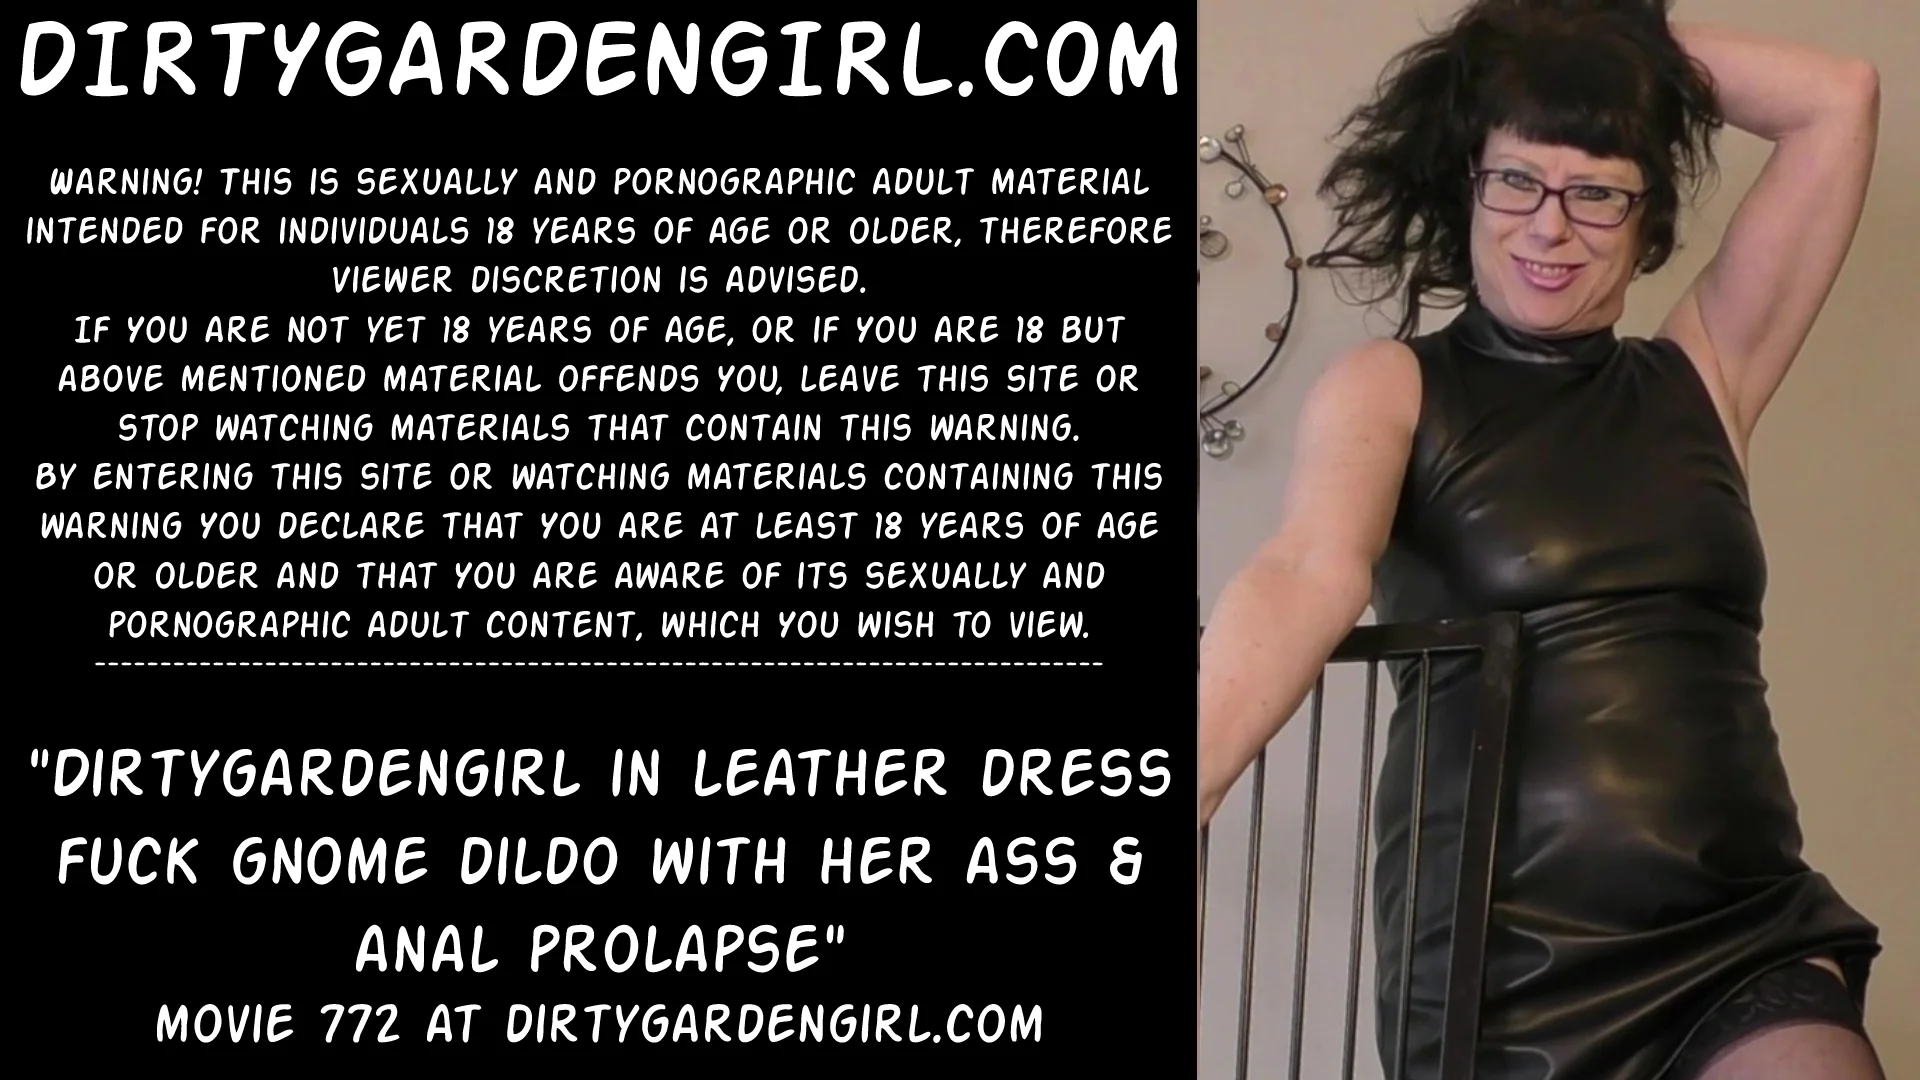 Dirtygardengirl in leather dress fuck gnome dildo anal pic